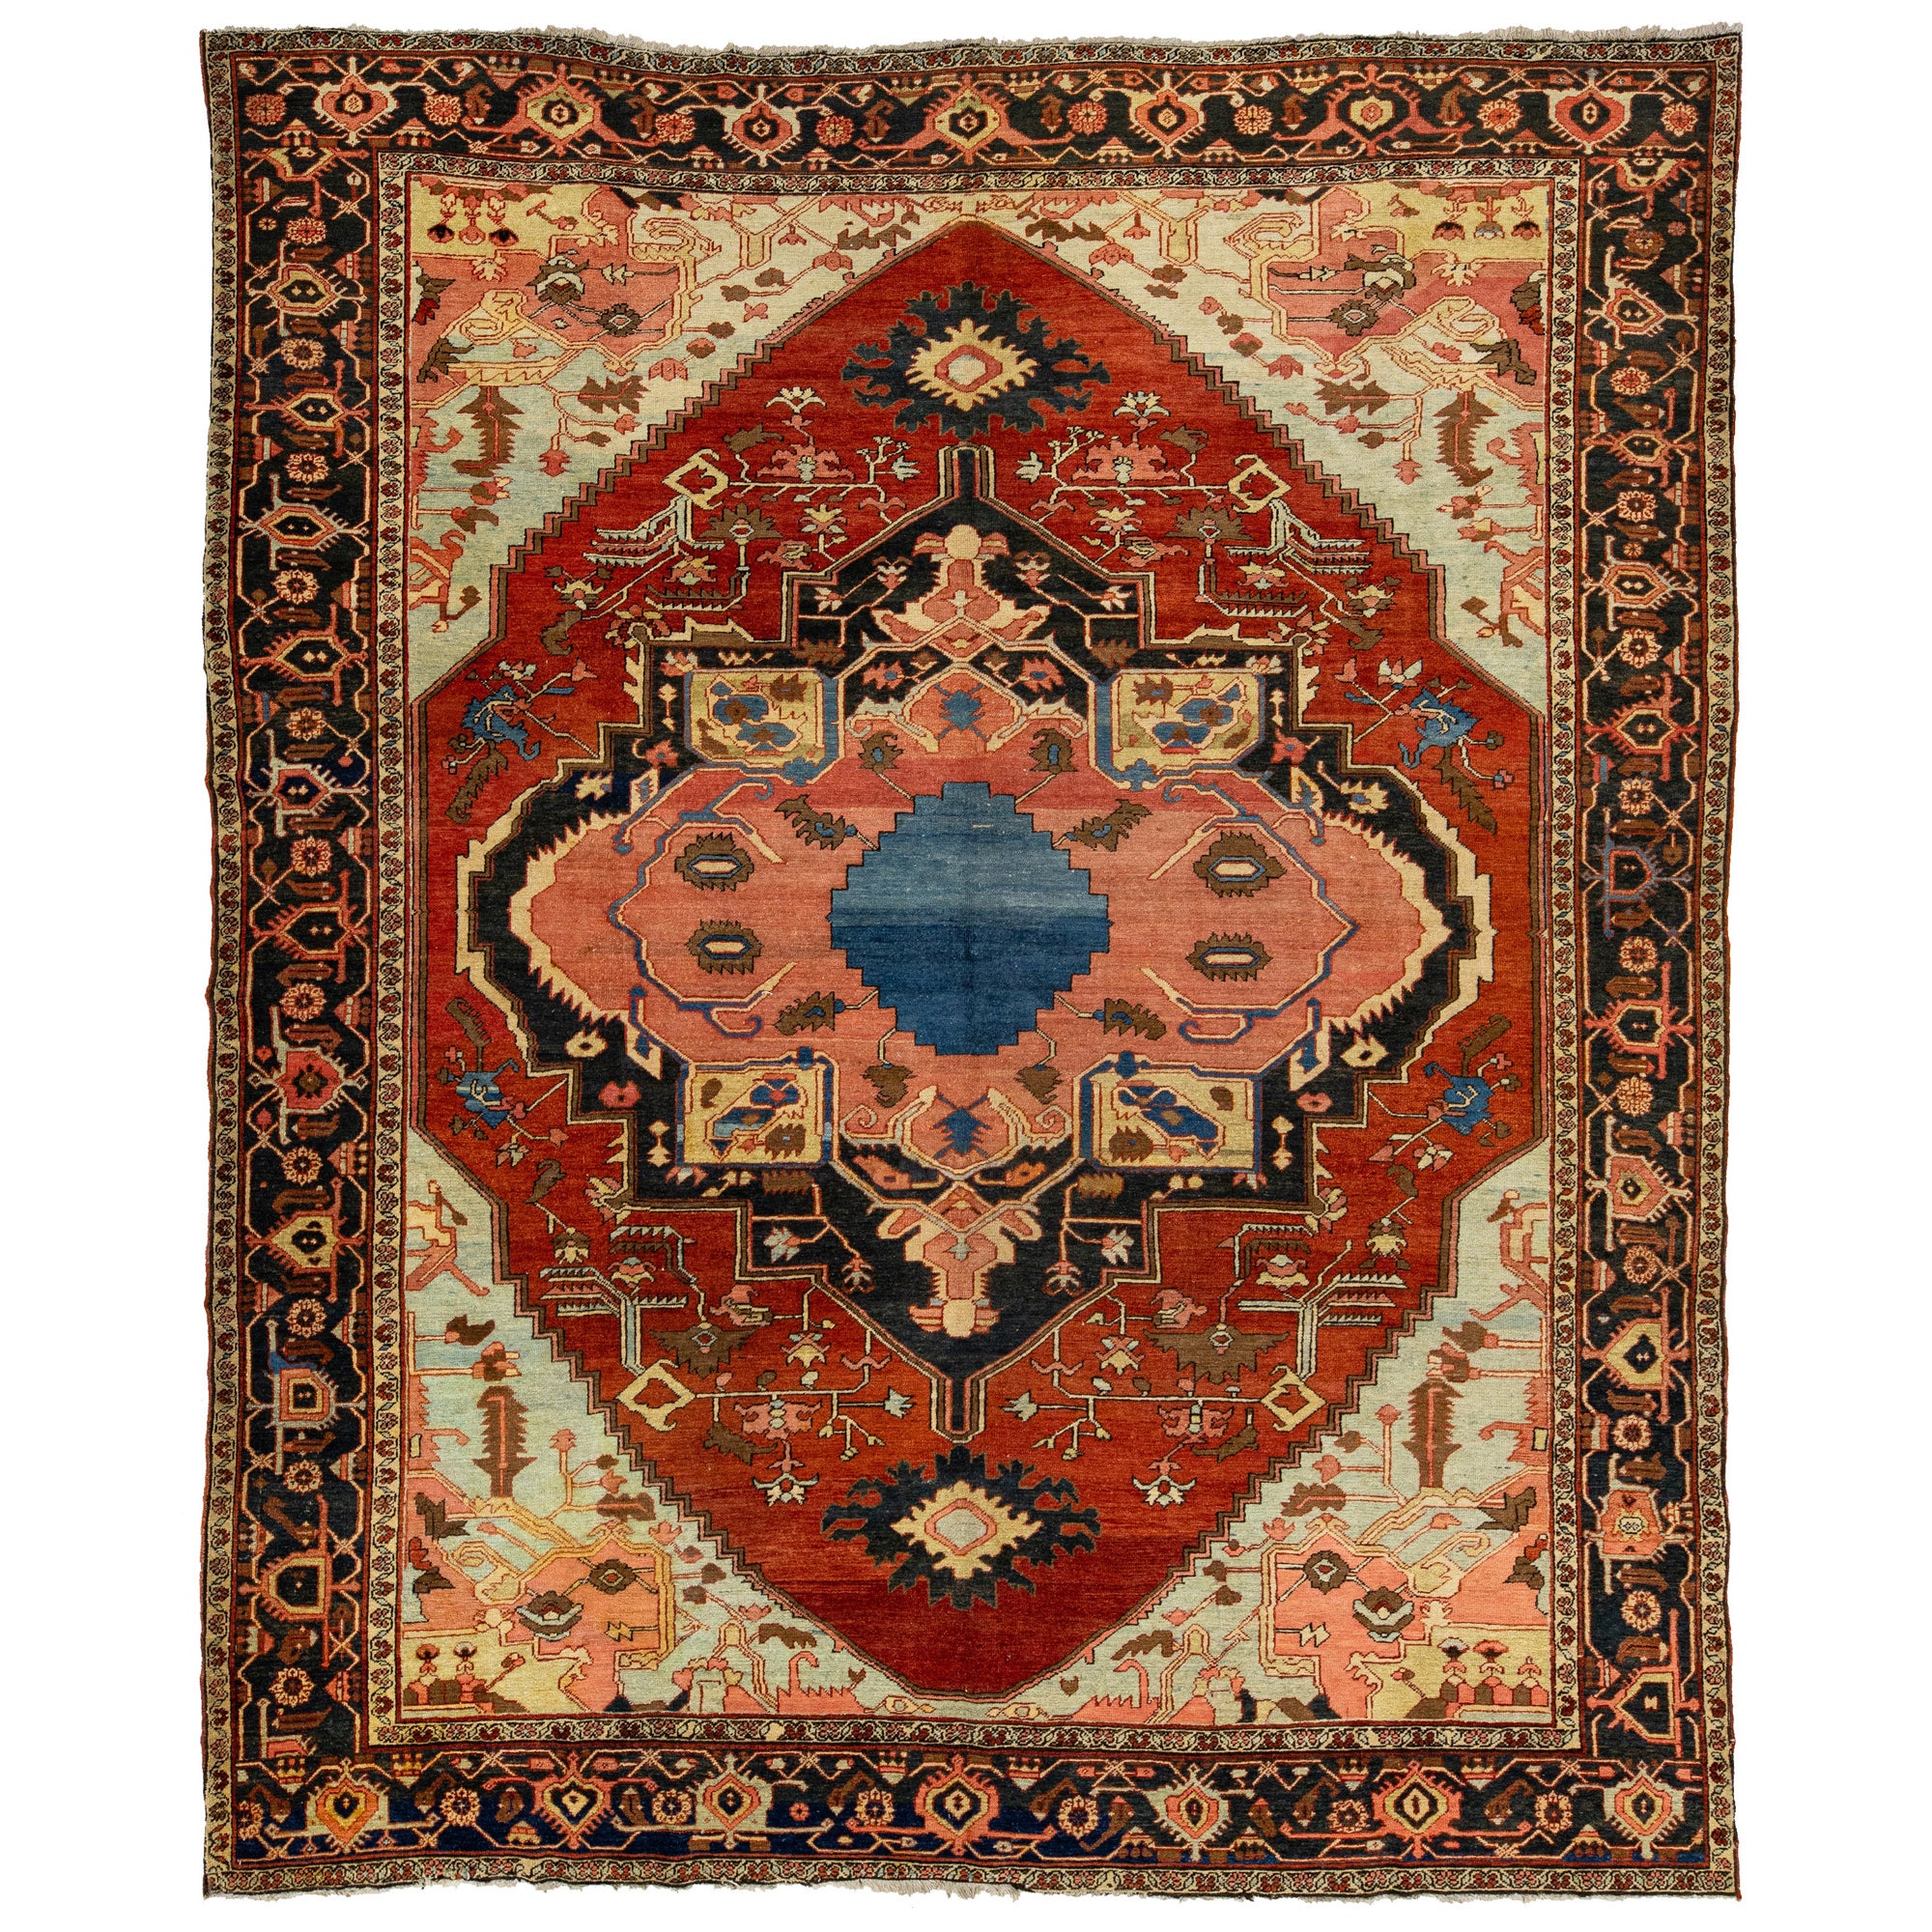 1870s Antique Wool Rug Persian Serapi Featuring a Medallion Motif In Rust Color For Sale